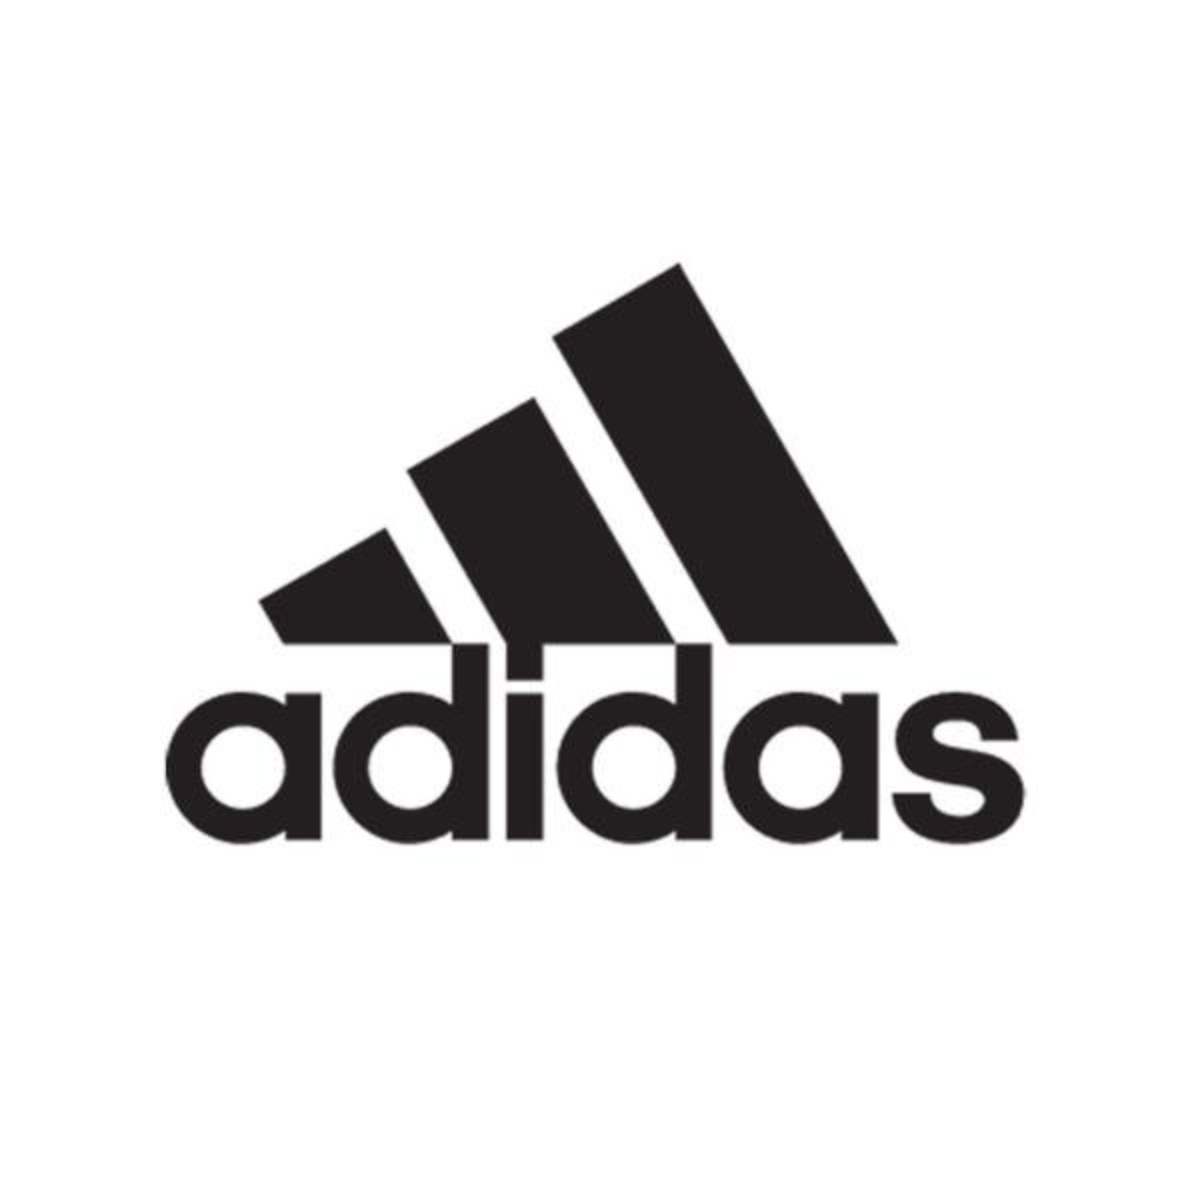 adidas 35% Off Full Price + 10% Outlet Items - UNiDAYS student discount December 2022